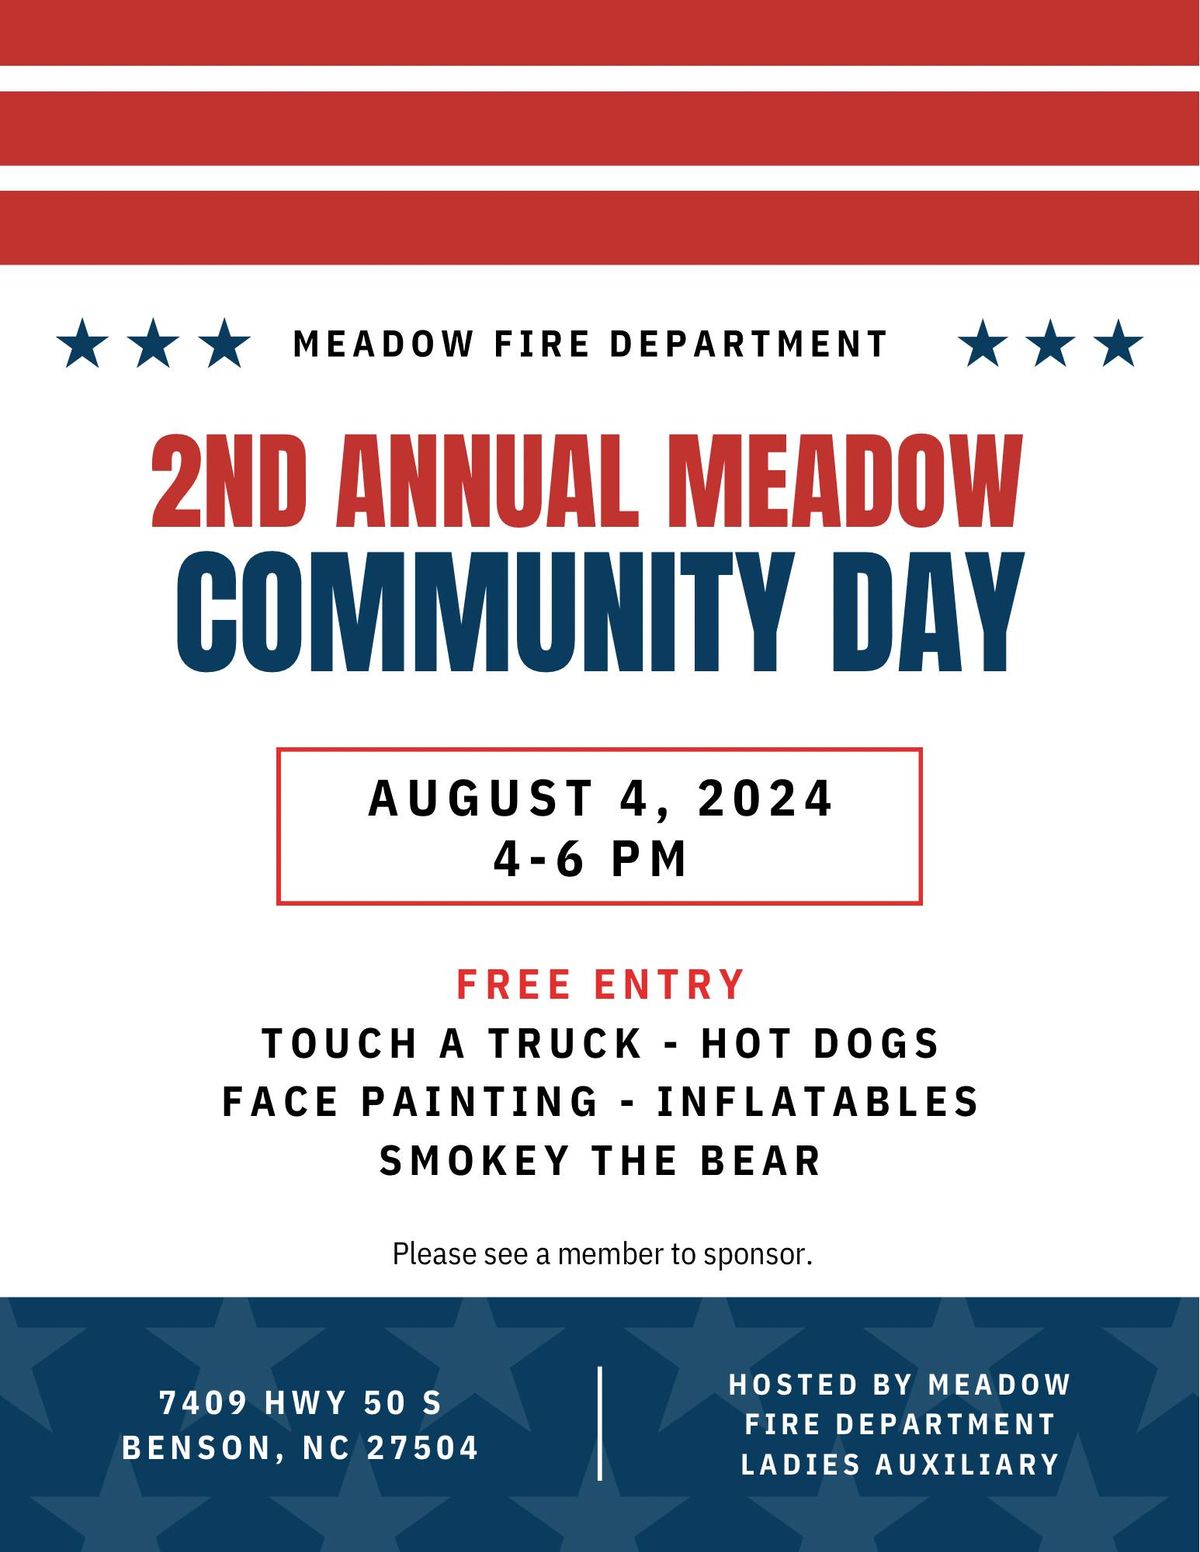 2nd Annual Meadow Community Day